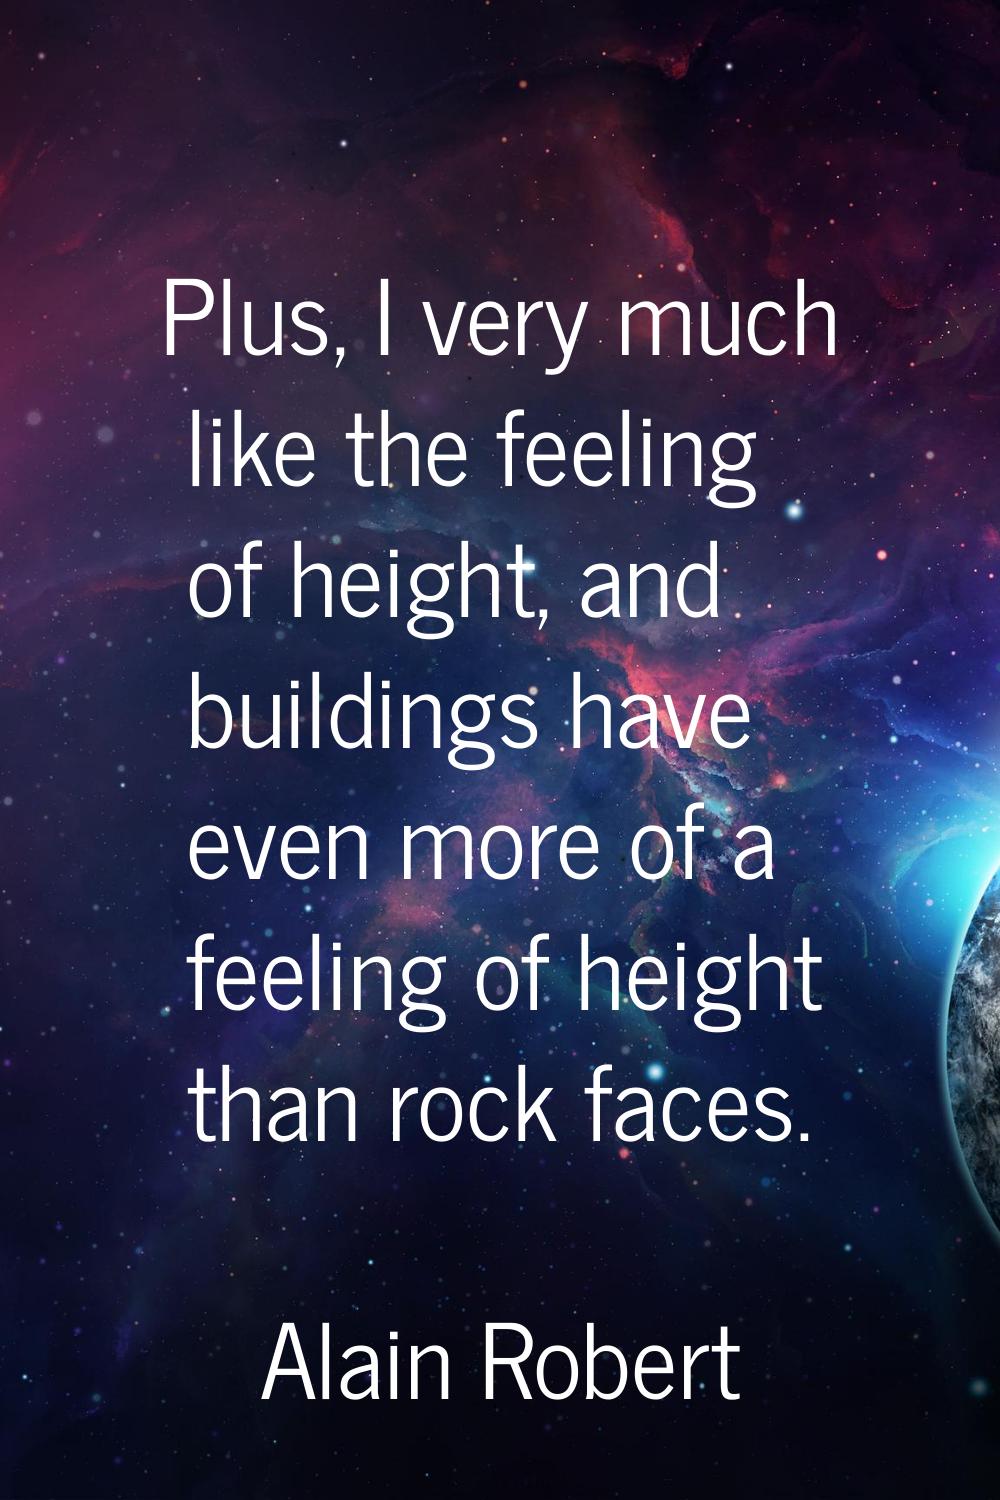 Plus, I very much like the feeling of height, and buildings have even more of a feeling of height t